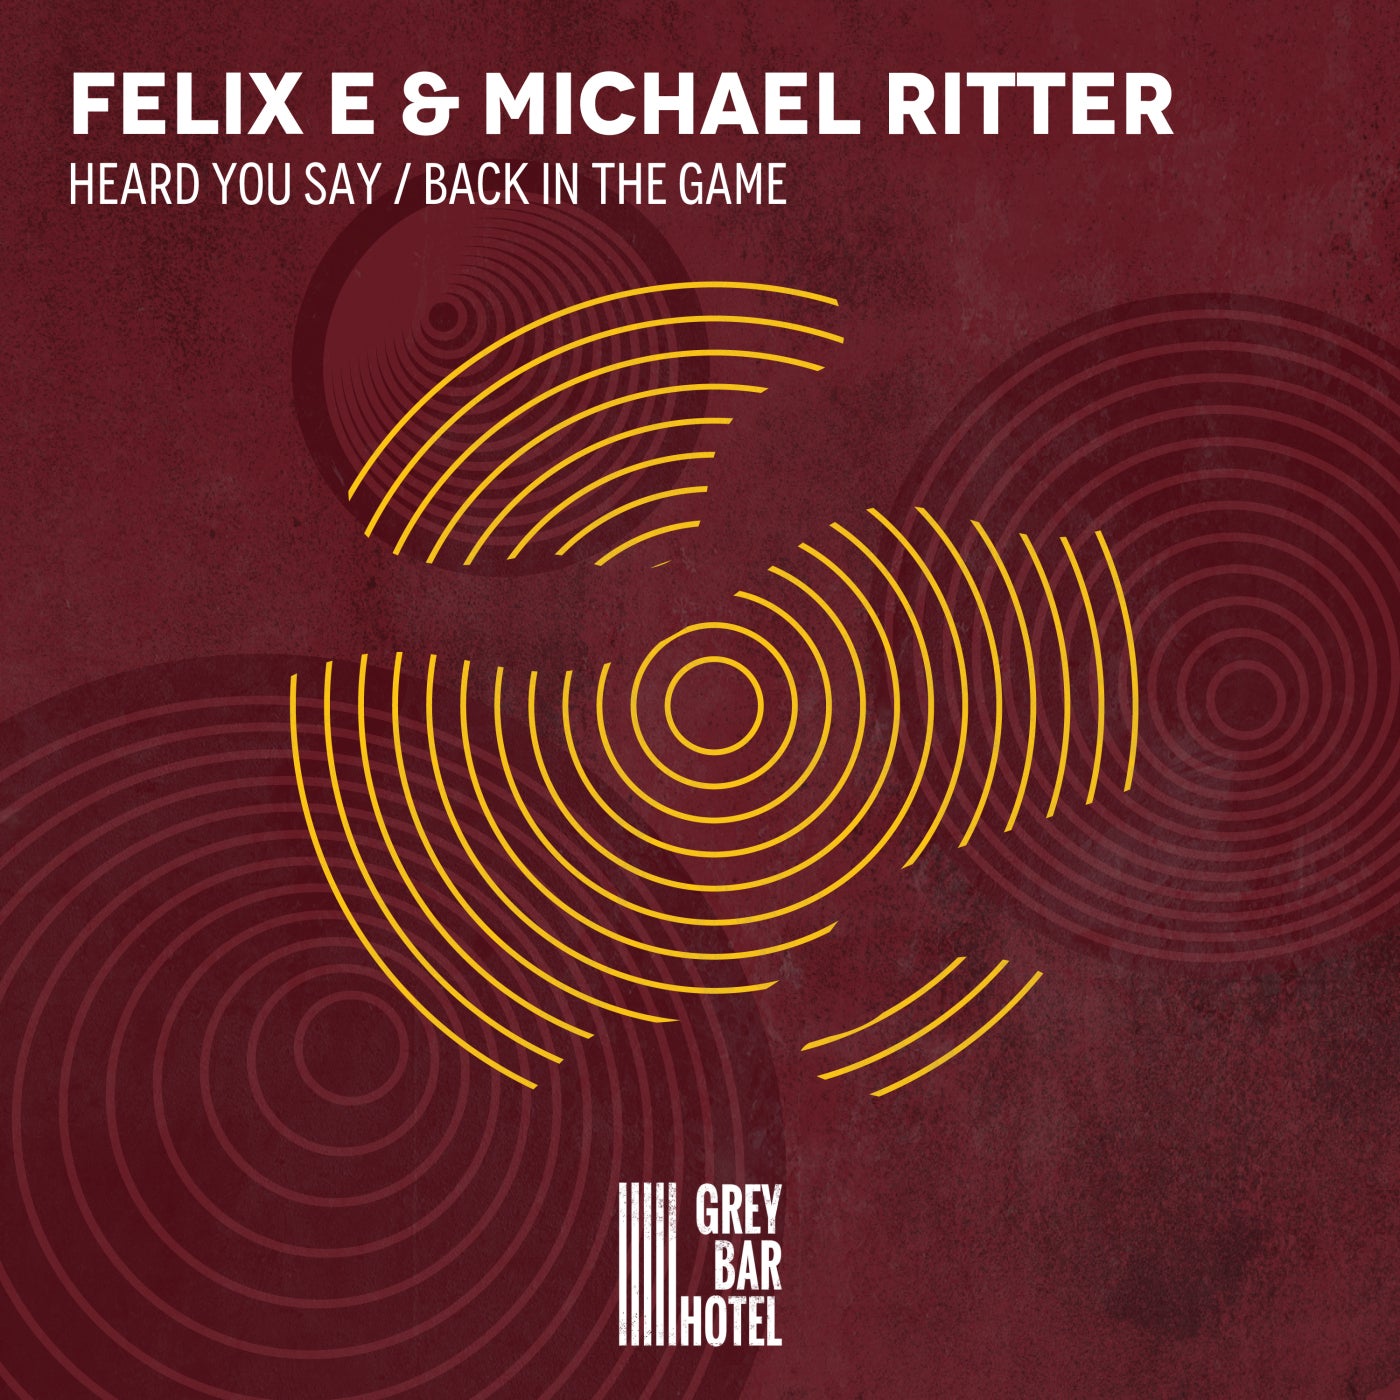 Michael Ritter, Felix E. – Heard You Say / Back in the Game [GBH030]